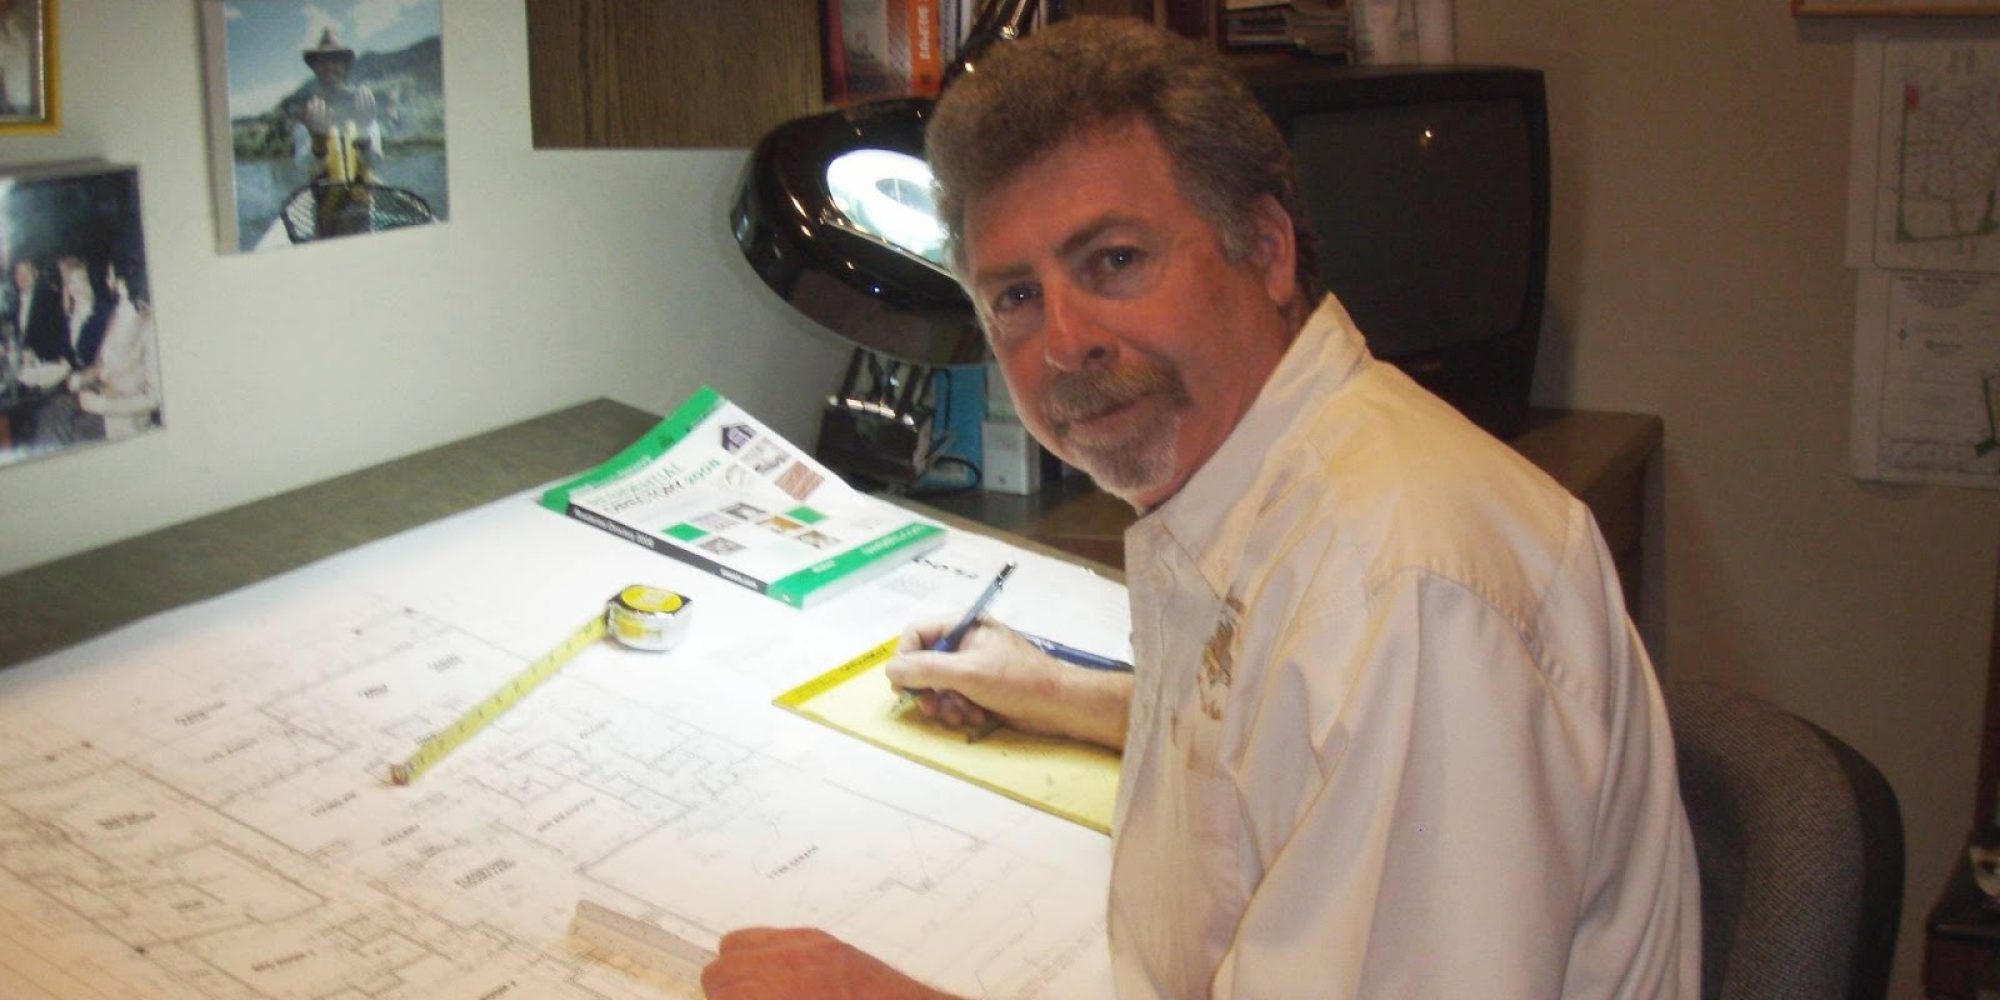 Judd Singer sitting at his drafting desk, working on a new floor plan